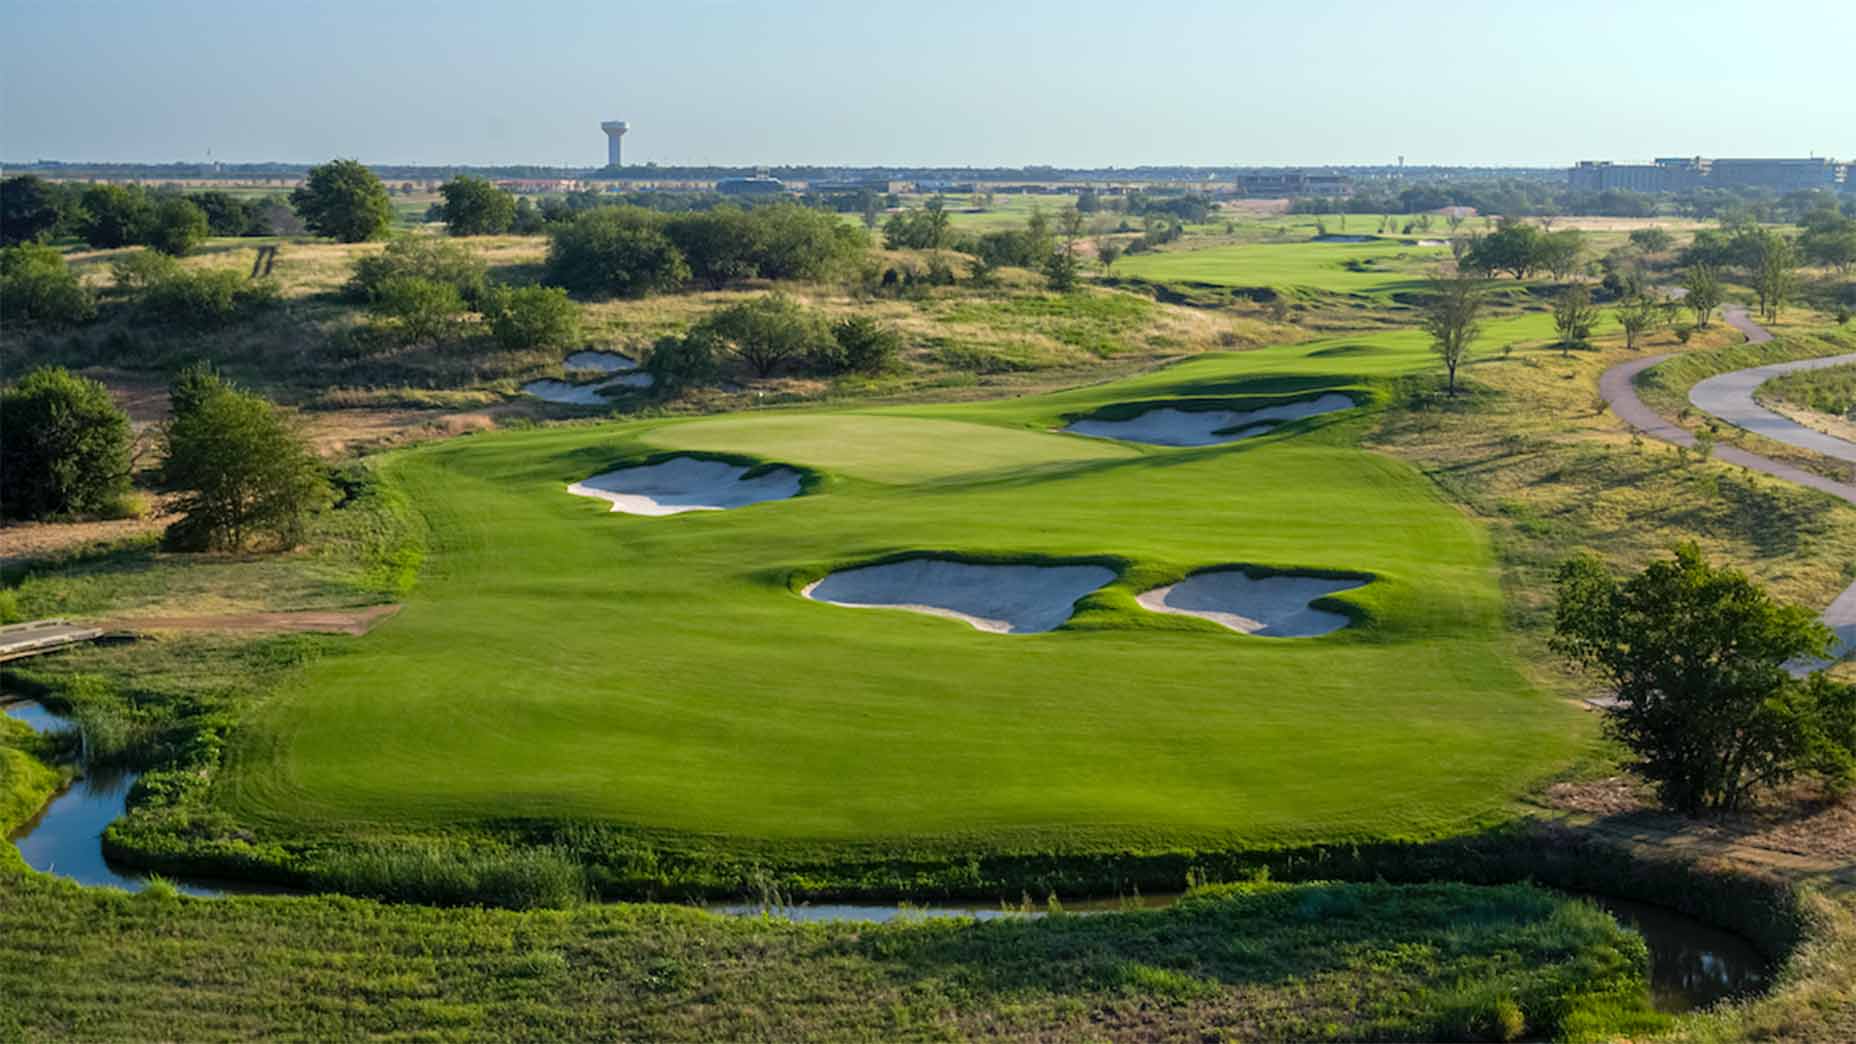 A view of Fields Ranch East in Frisco, Texas.